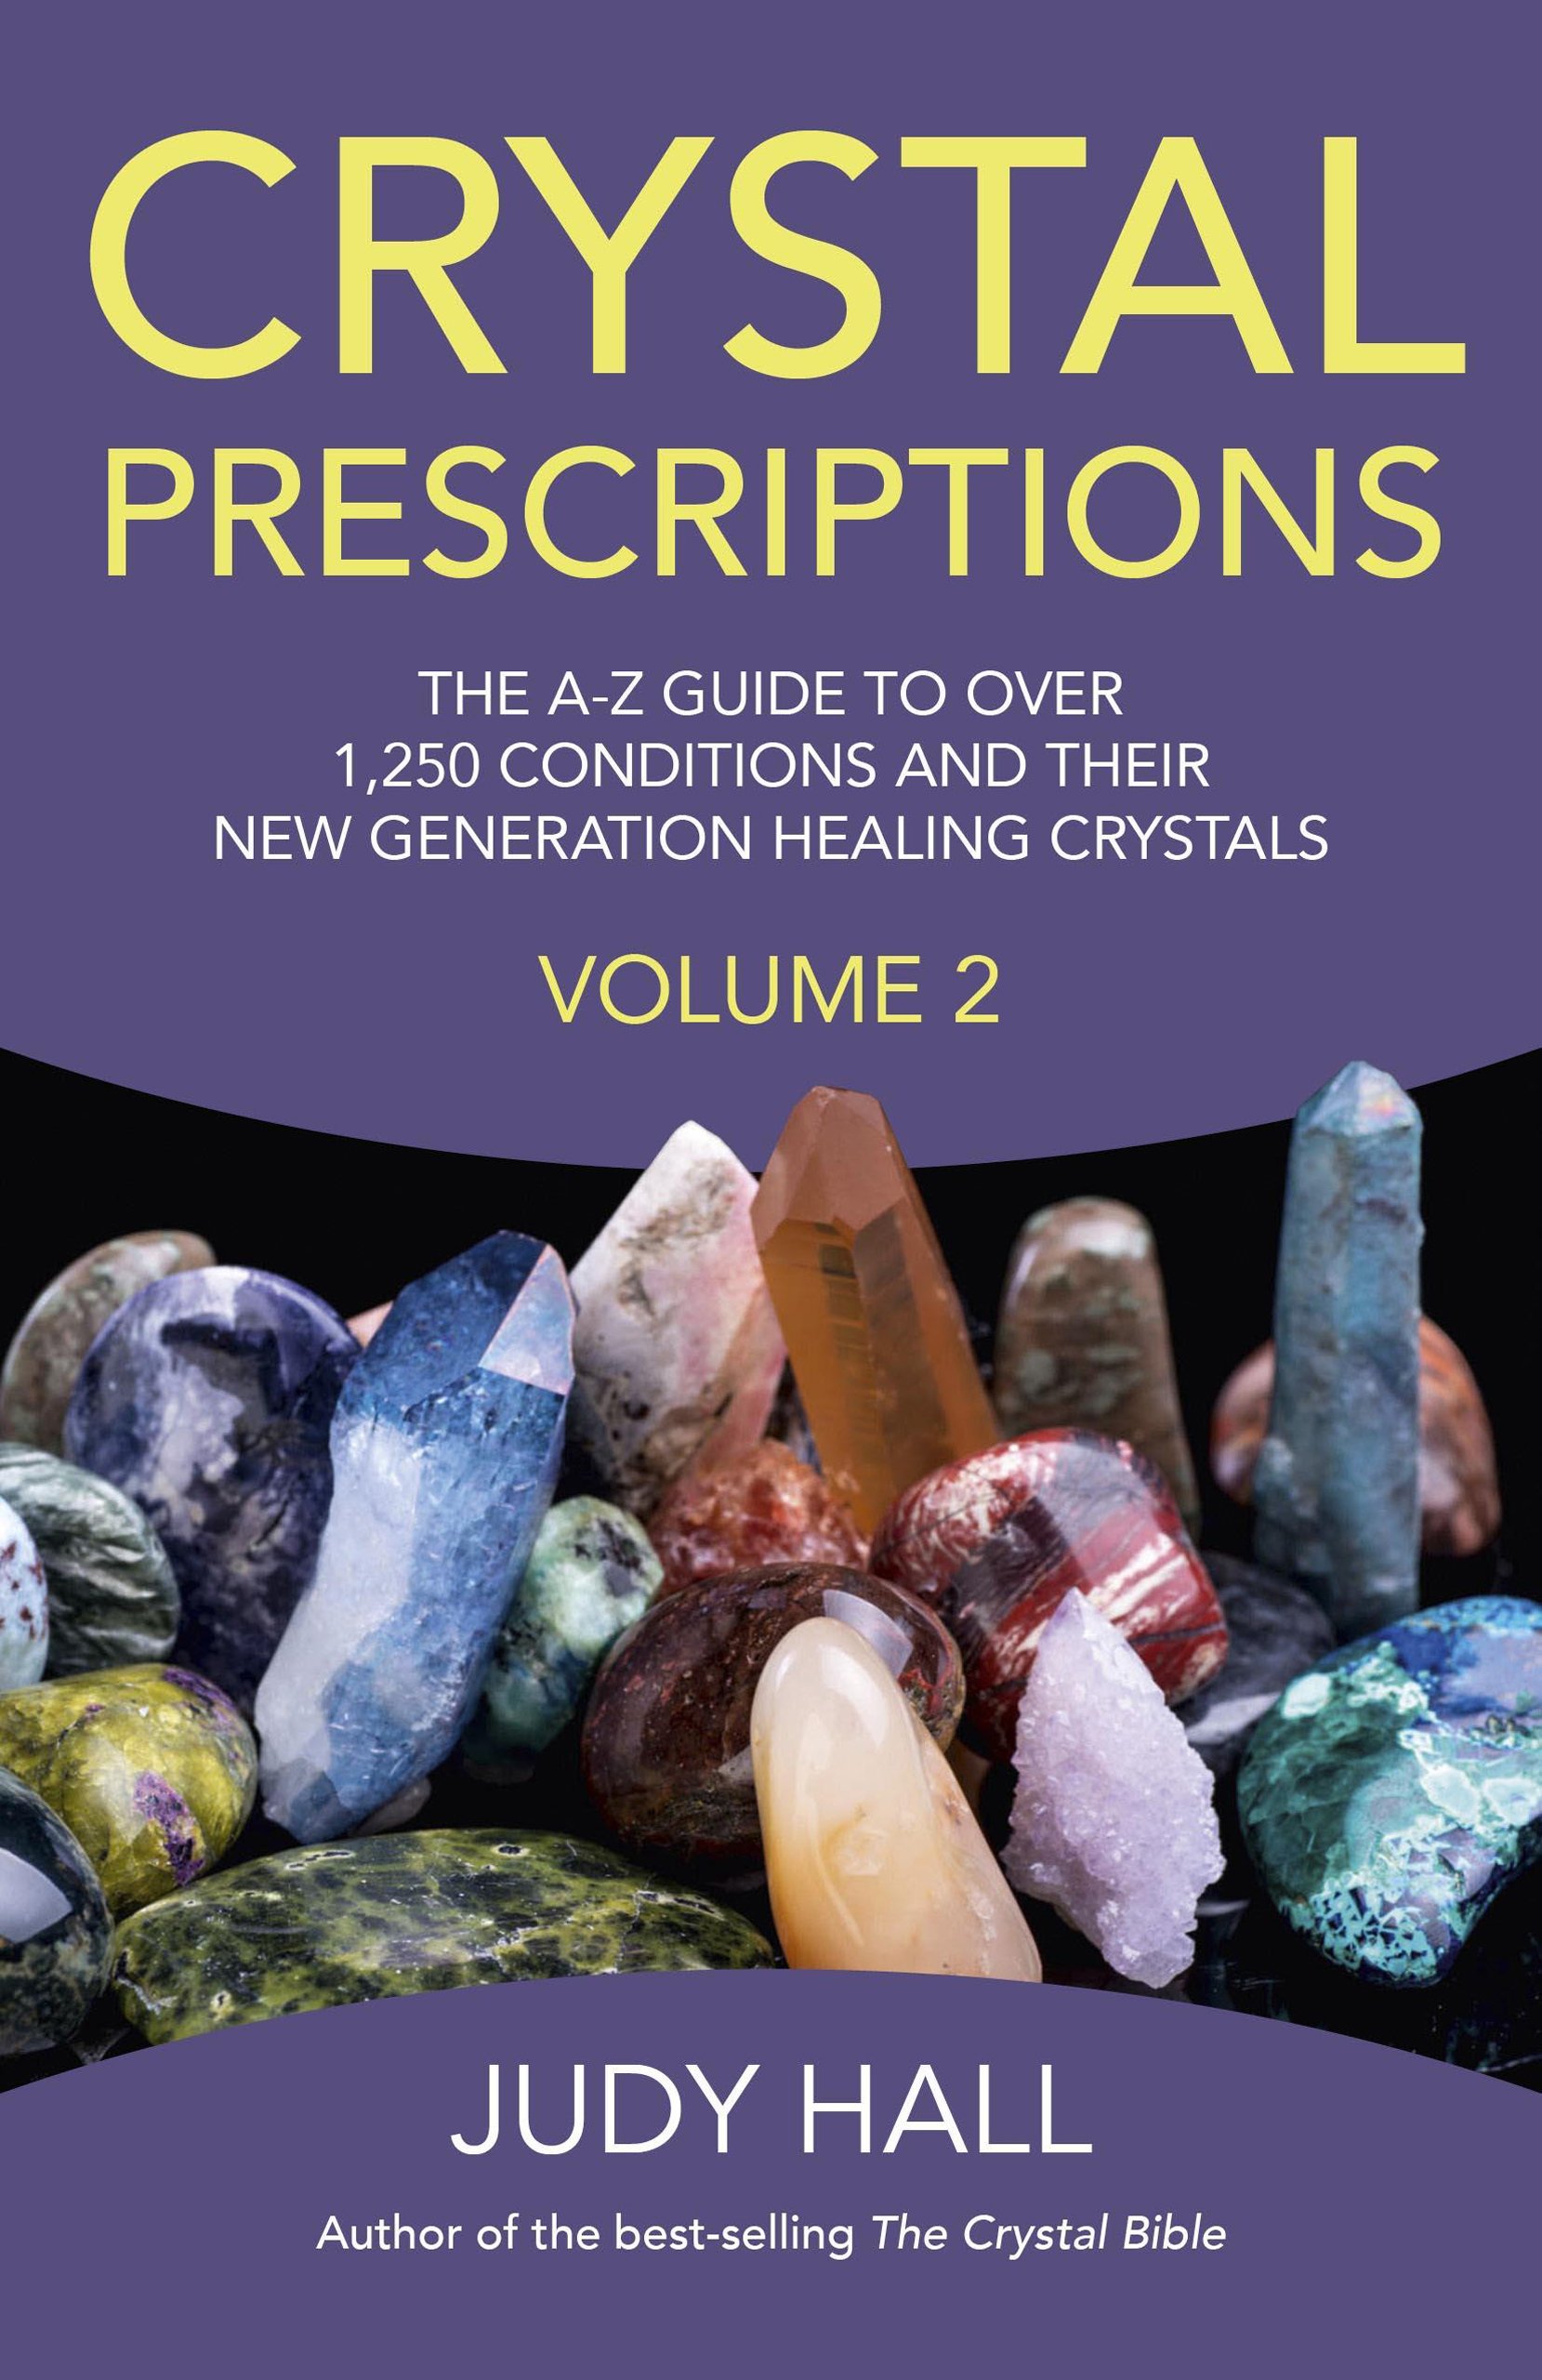 Crystal Prescriptions: The A-Z Guide to Over 1,250 Conditions and Their New Generation Healing Crystals